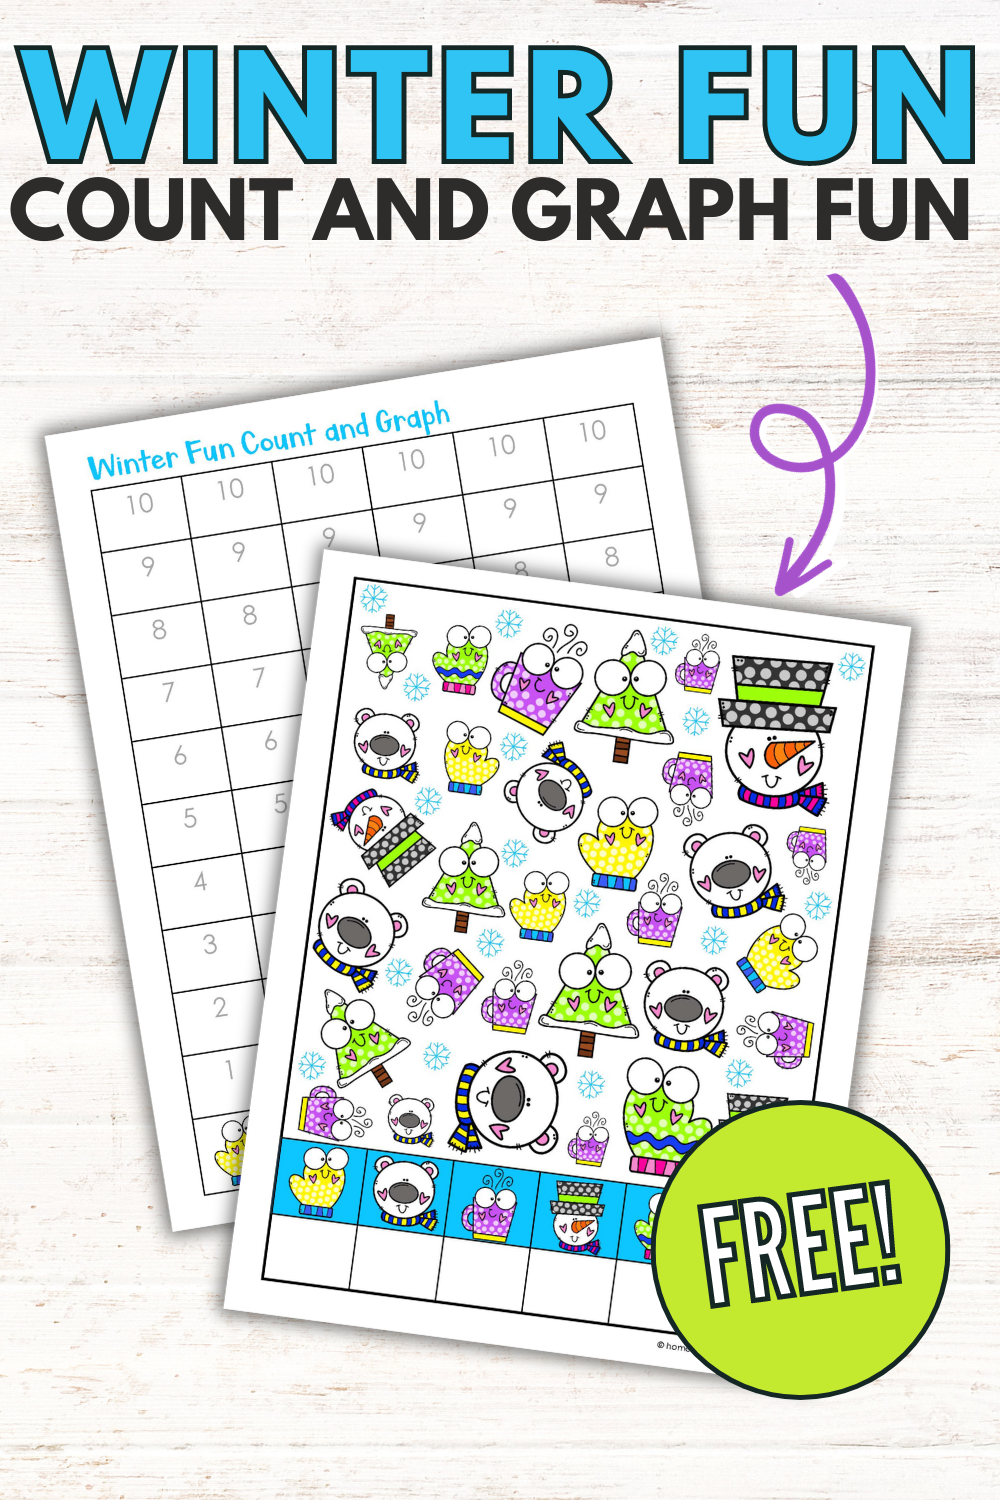 count-and-graph-worksheets-1 Winter Fun Count and Graph Worksheets